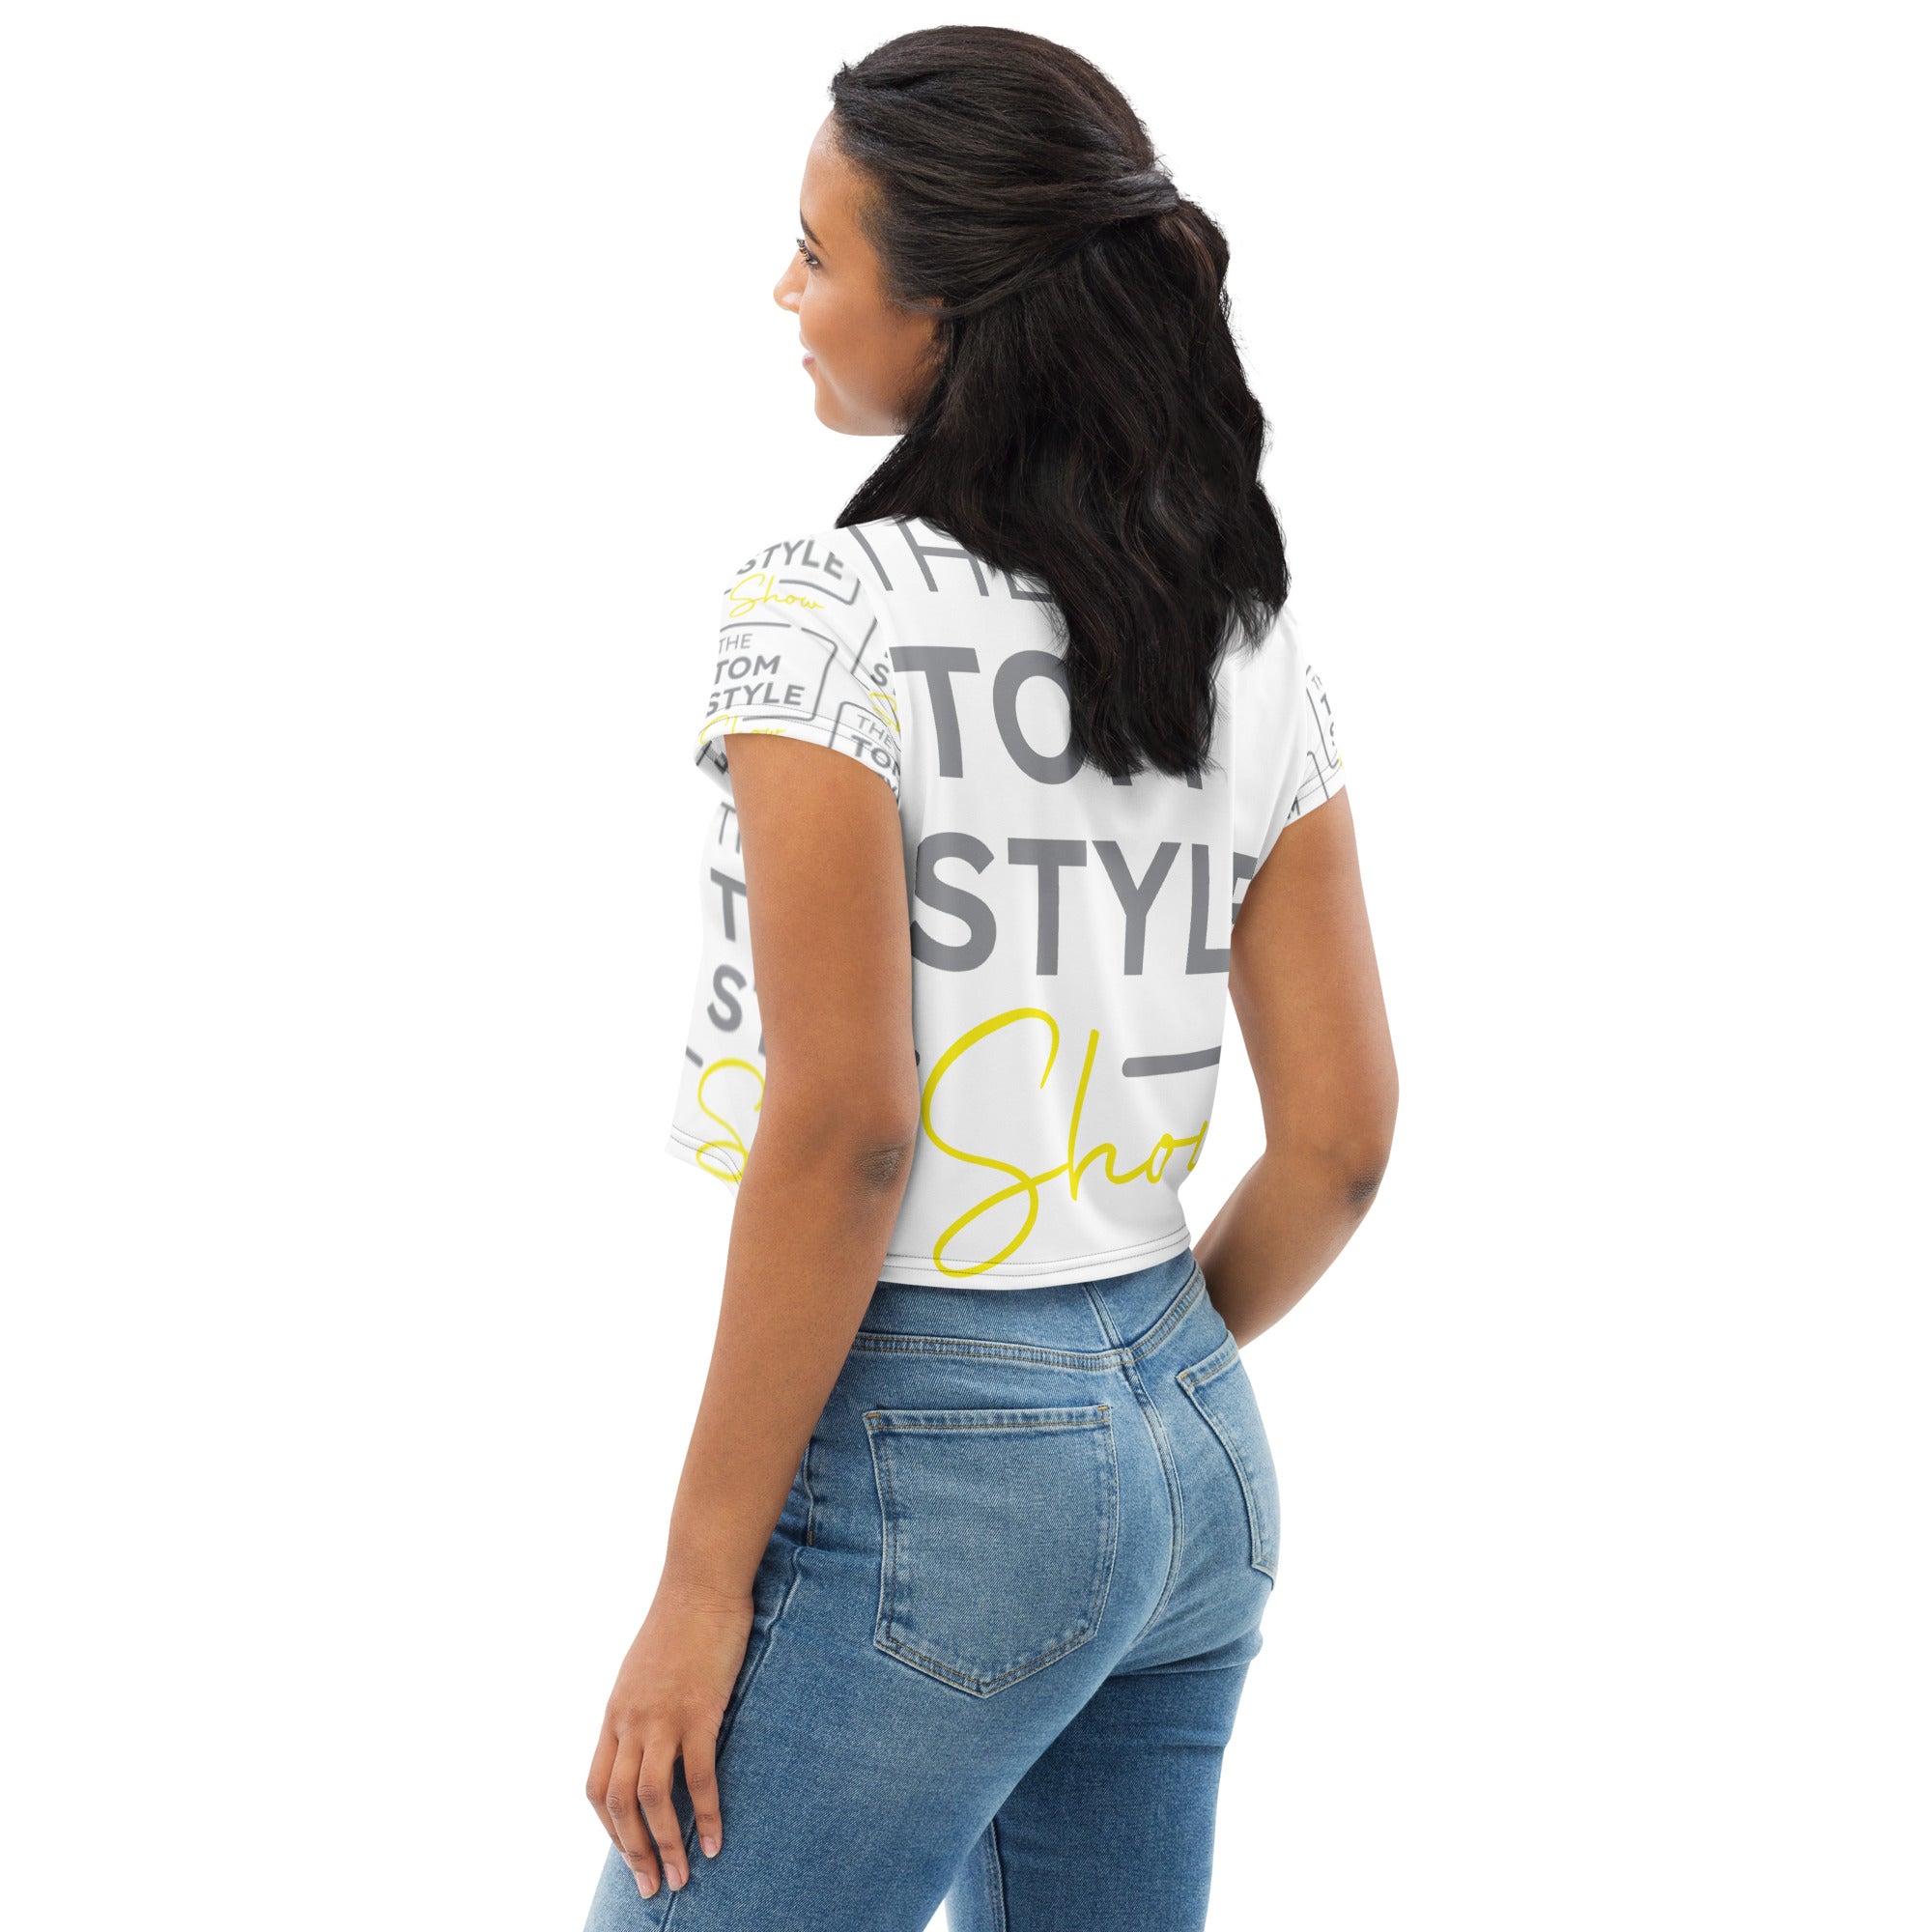 Women's All-Over Print Crop Tee - Tom Style Show